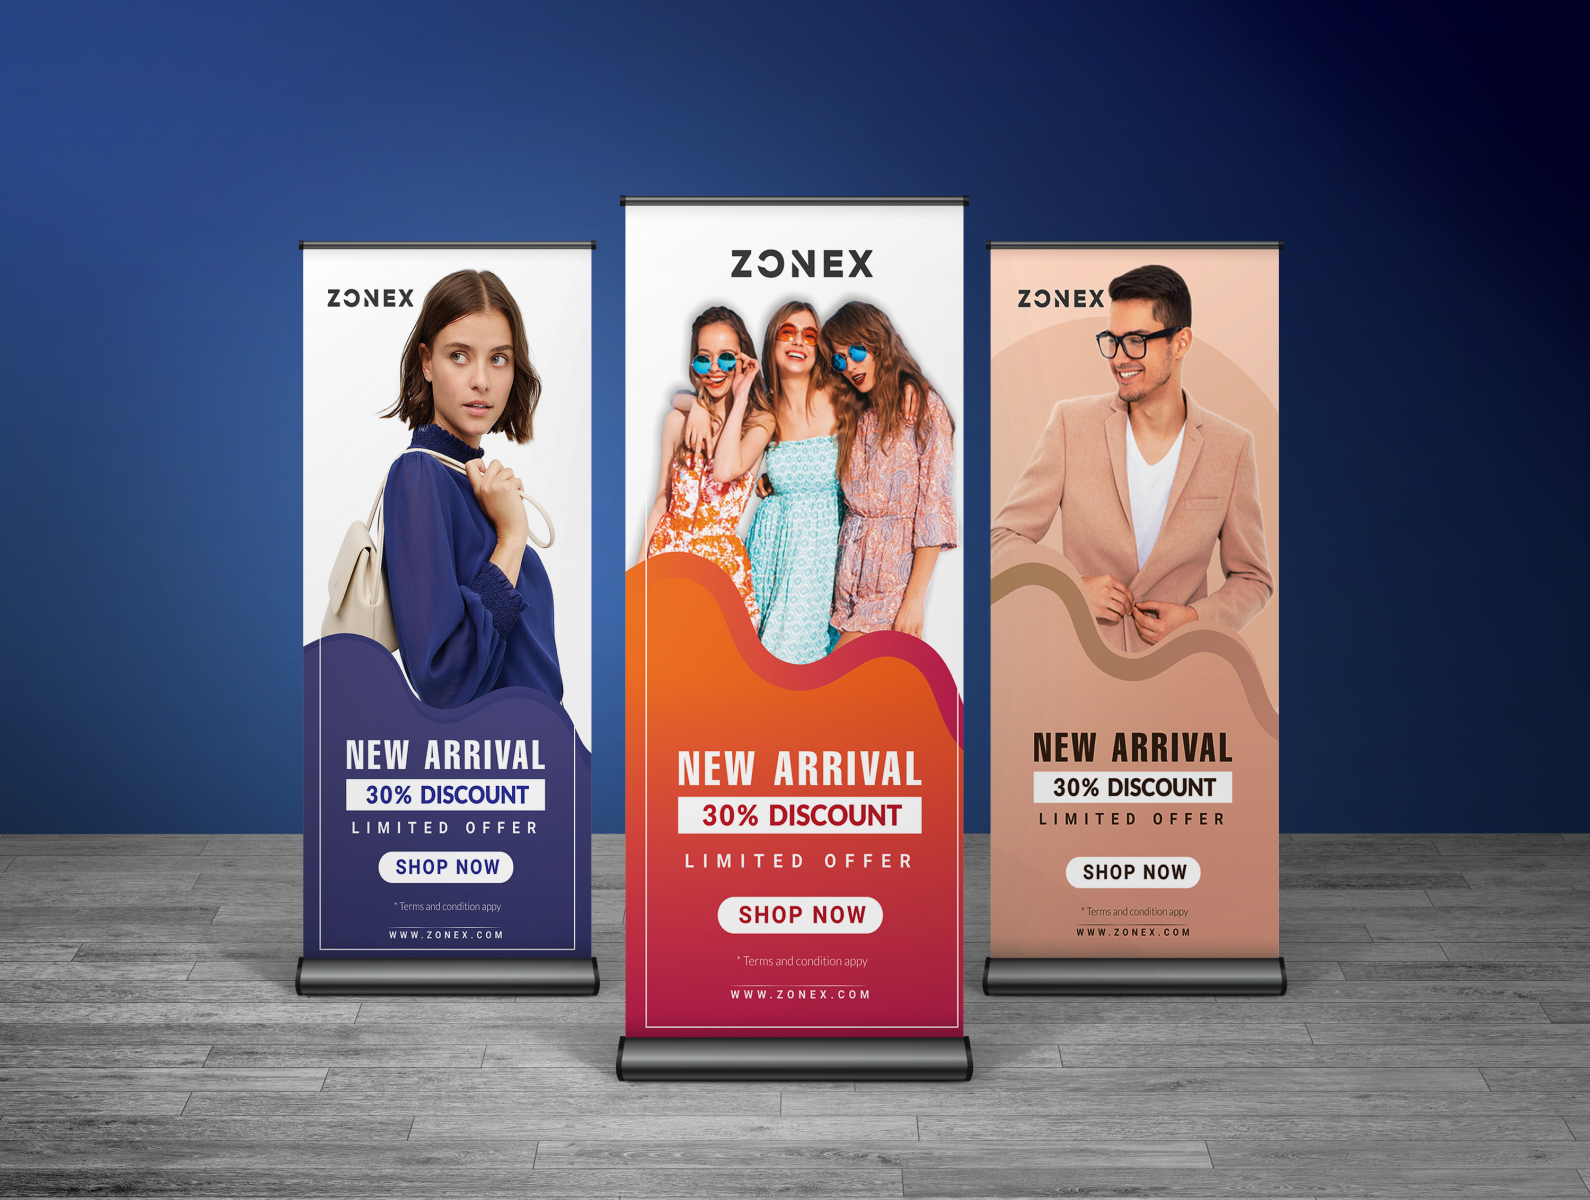 Fashion Roll Up Banner Design 2020 1 by Md Rahmat Ali on Dribbble